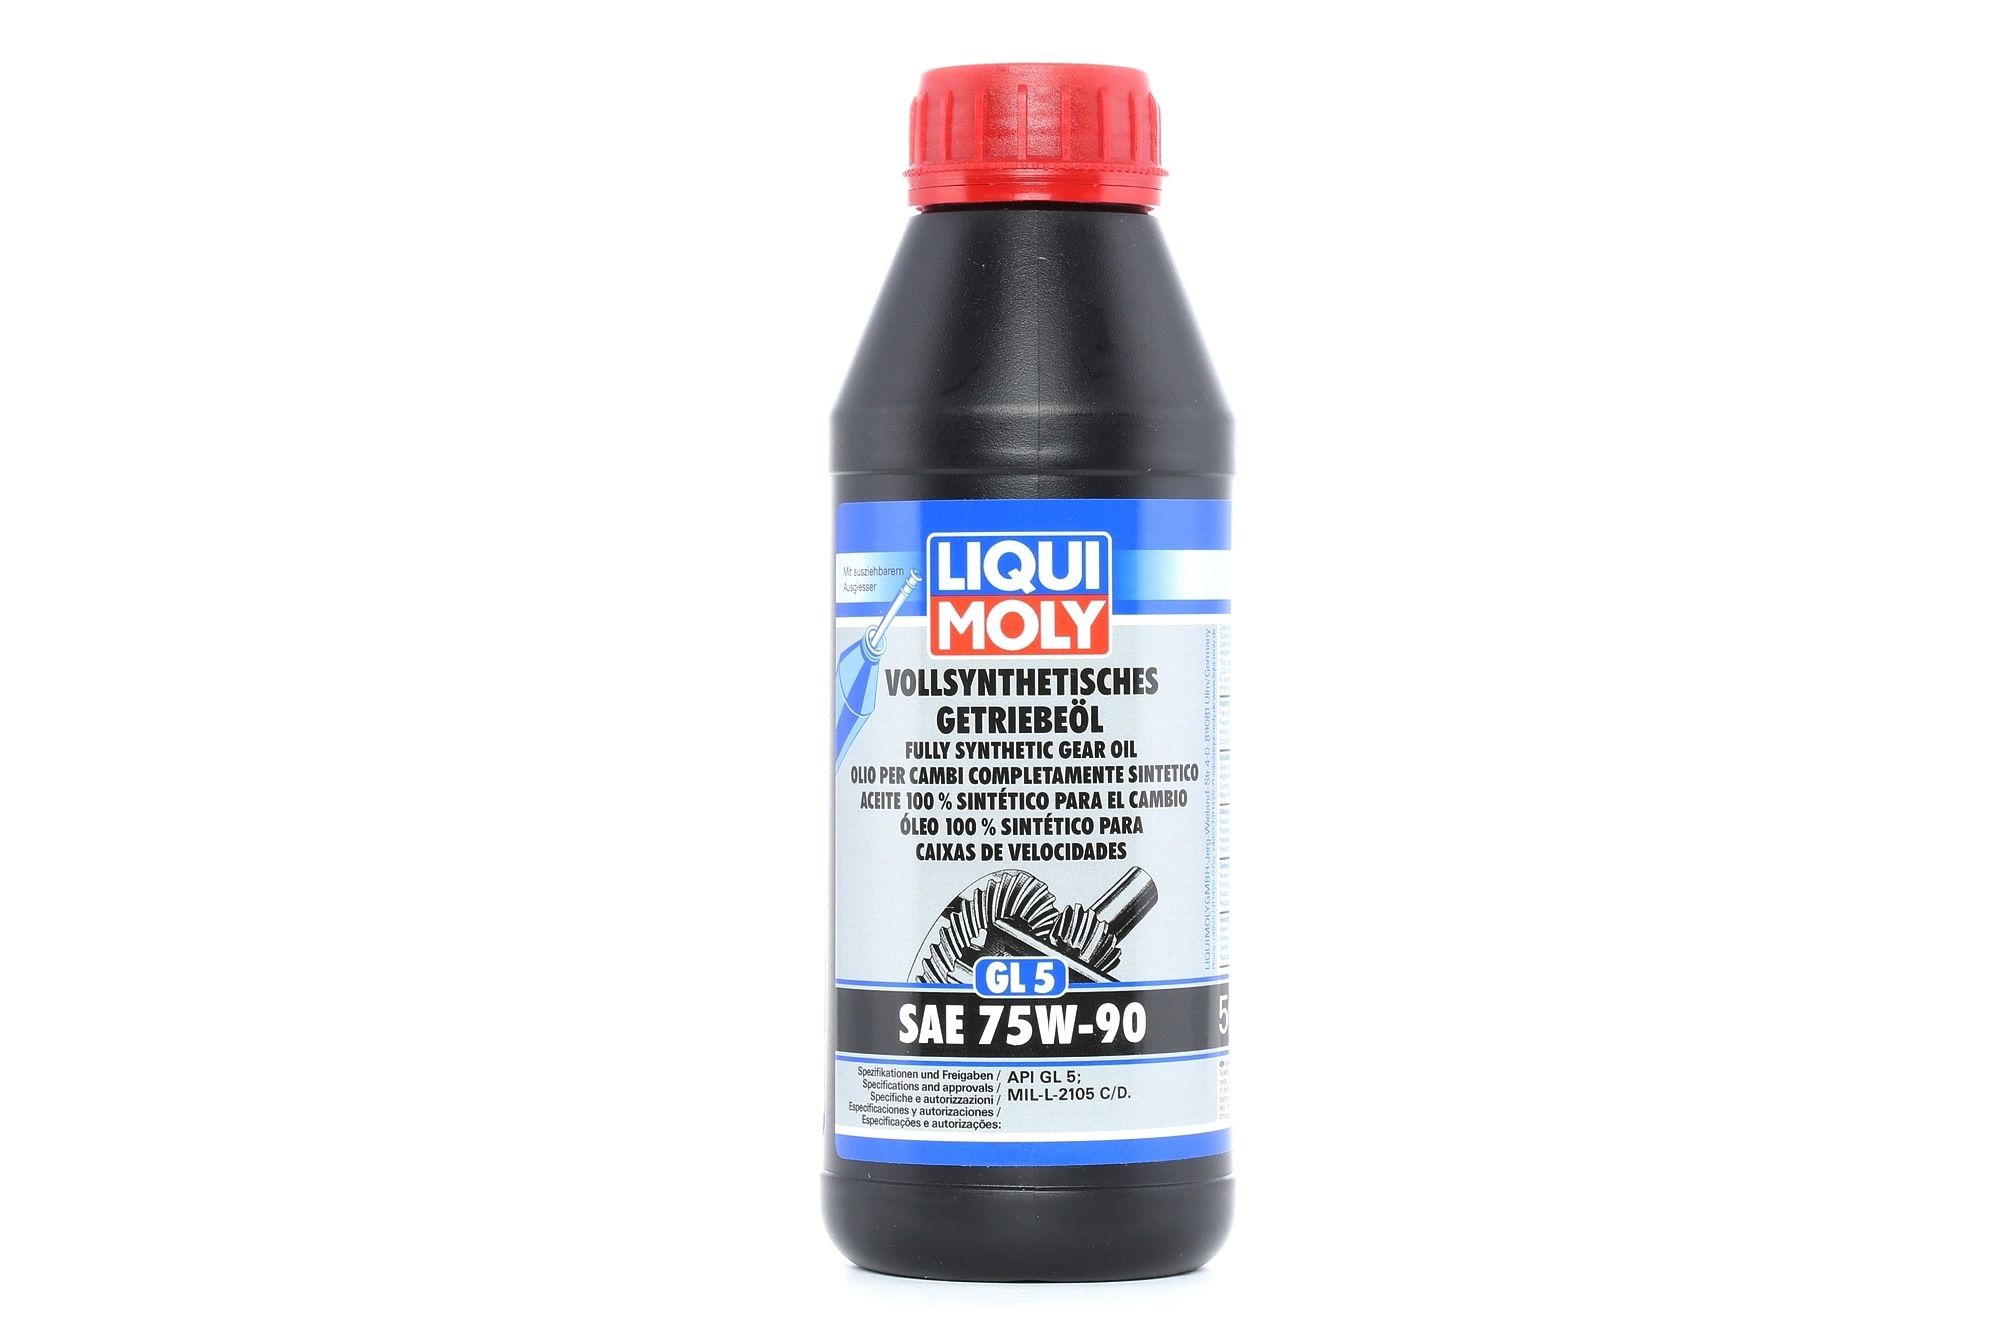 Transmission fluid LIQUI MOLY 1413 - Propshafts and differentials for Porsche spare parts order